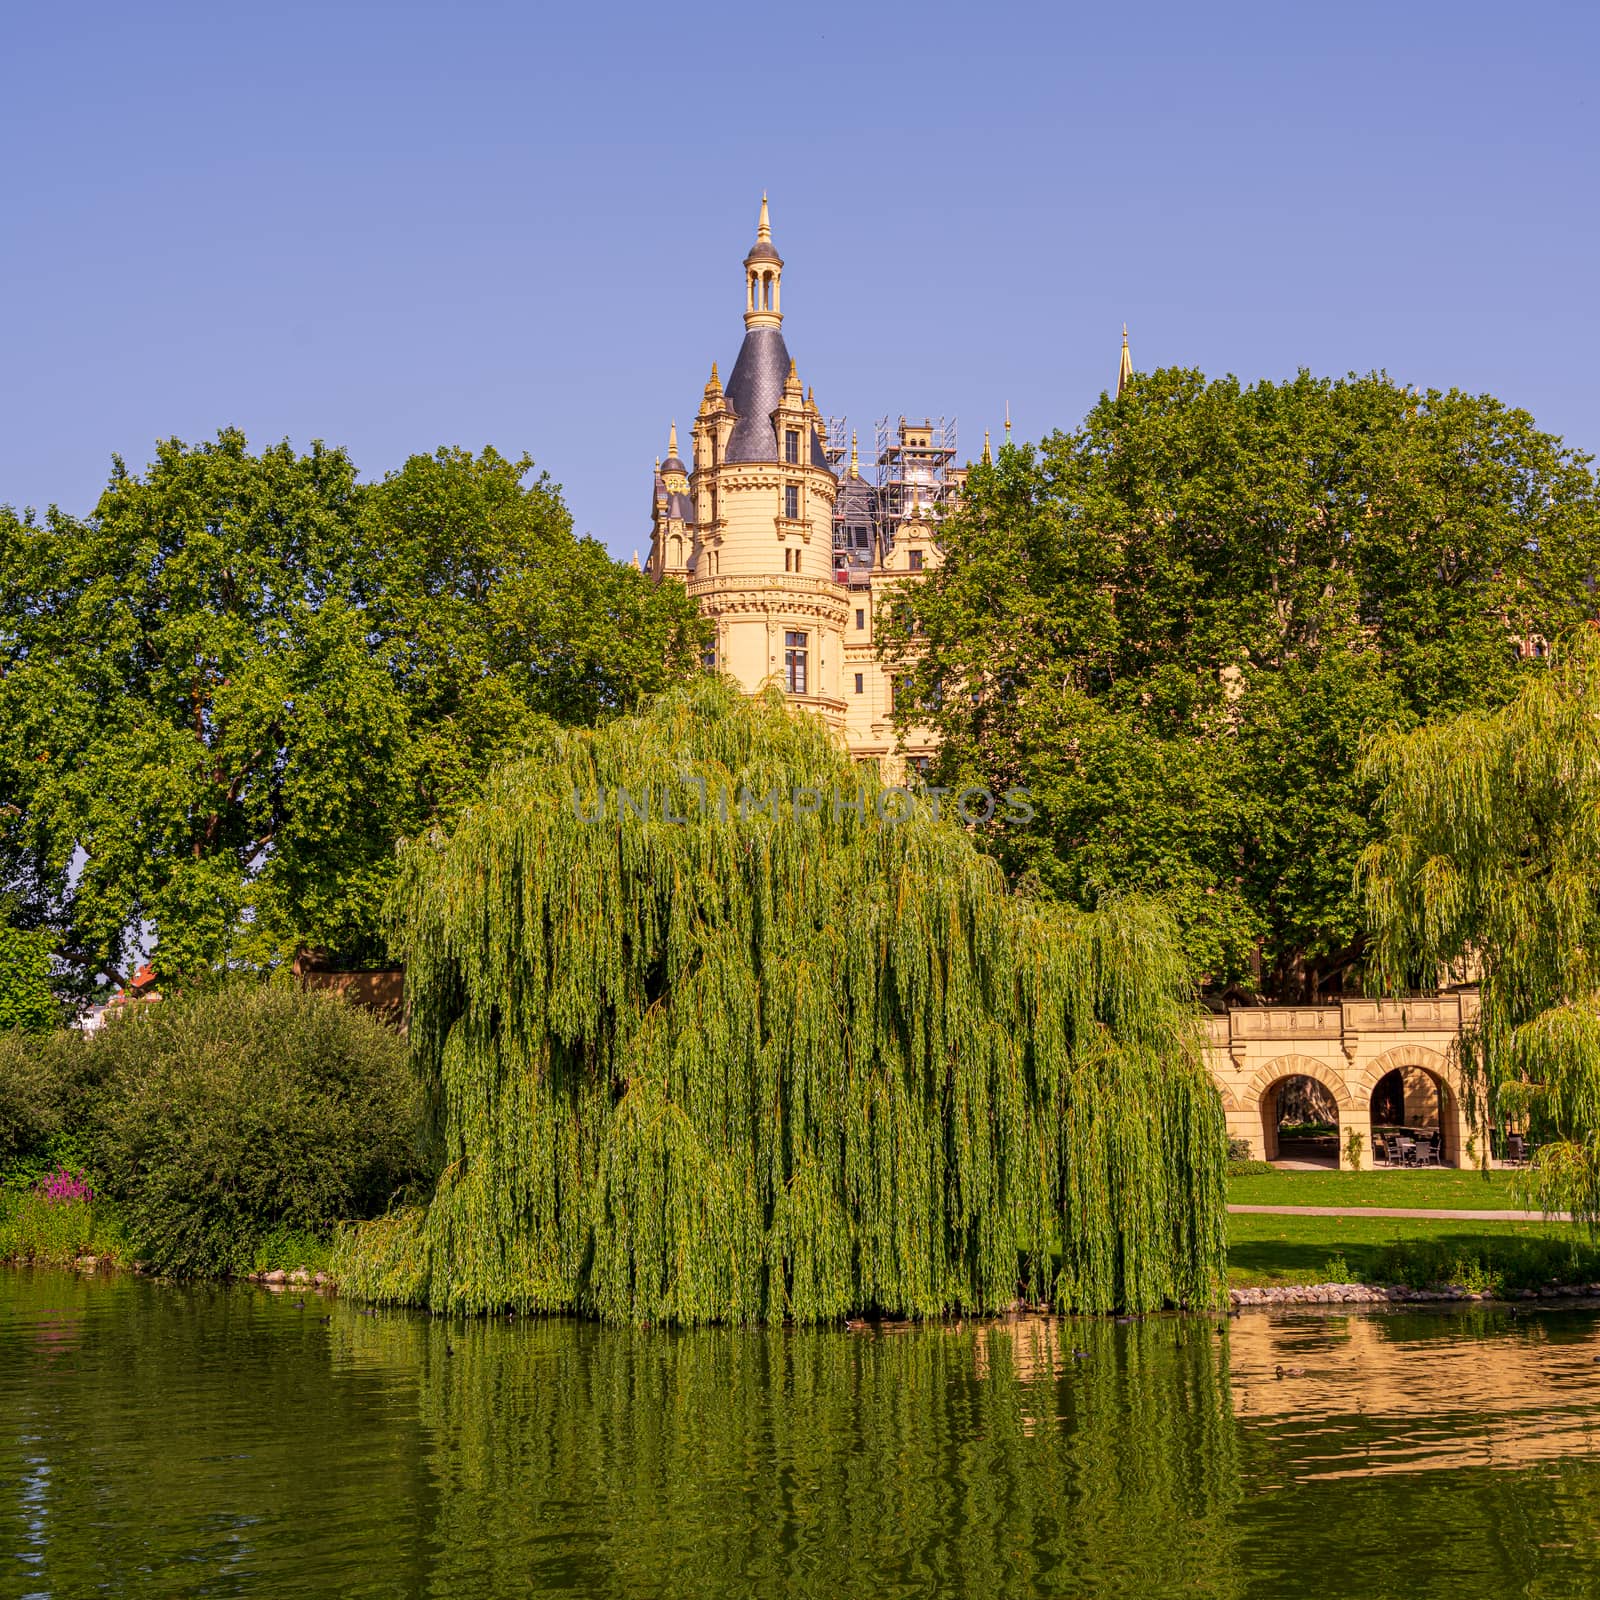 The branches of a weeping willow by Schwerin Castle seem to gracefully cascade into the lake.